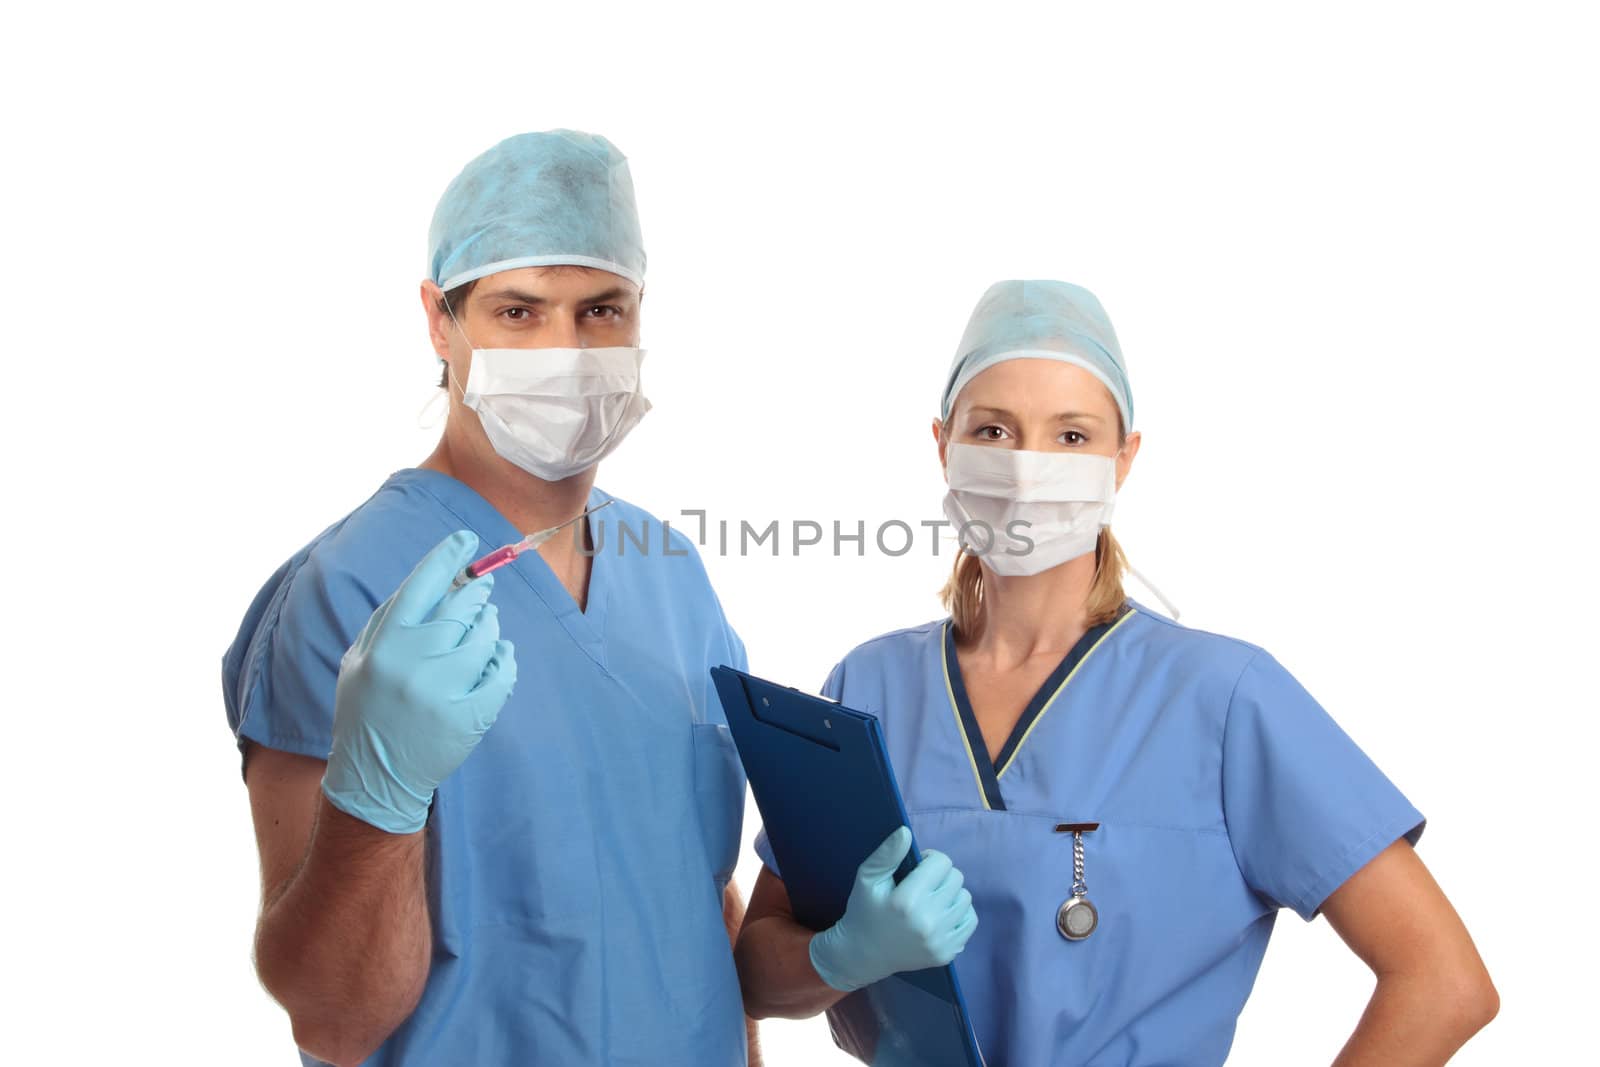 Male and female hospital medical staff standing together in scrubs uniform